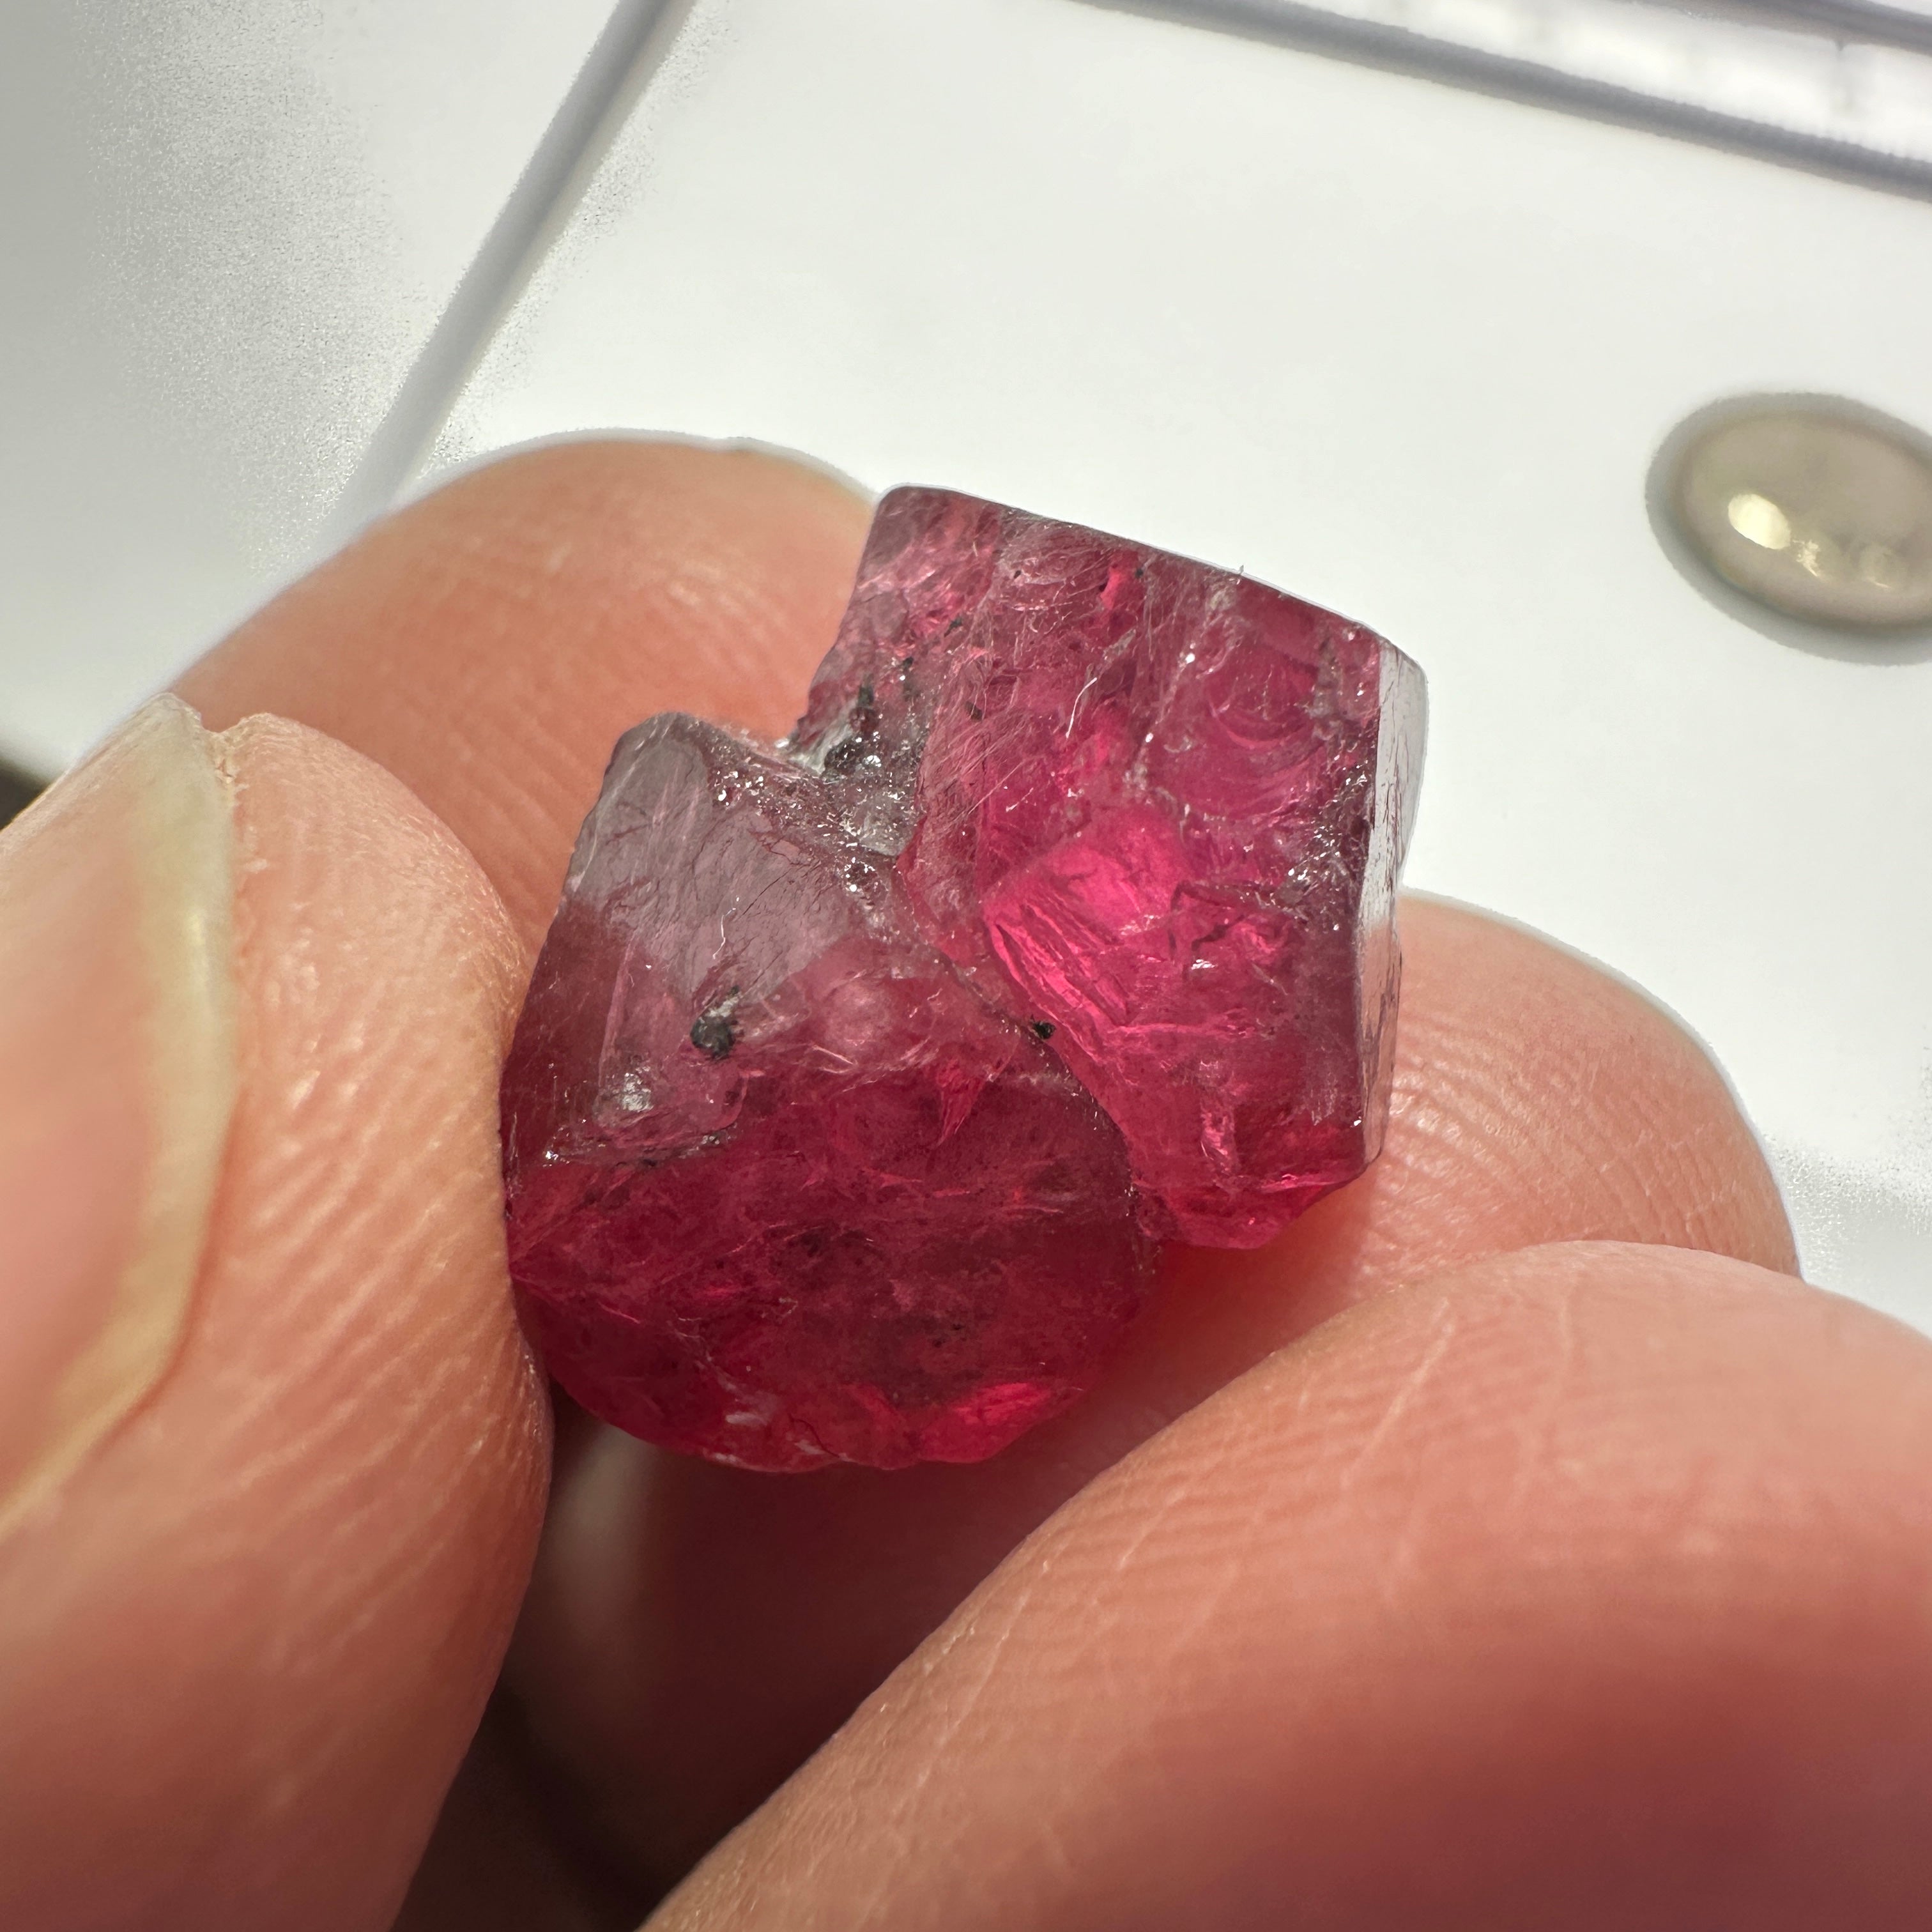 13.48ct Mahenge Red Spinel Crystal, Twin Crystal, Mahenge, Tanzania, Untreated Unheated - Tiny Facetable Portions. 15.9 x 9 x 8.8 mm